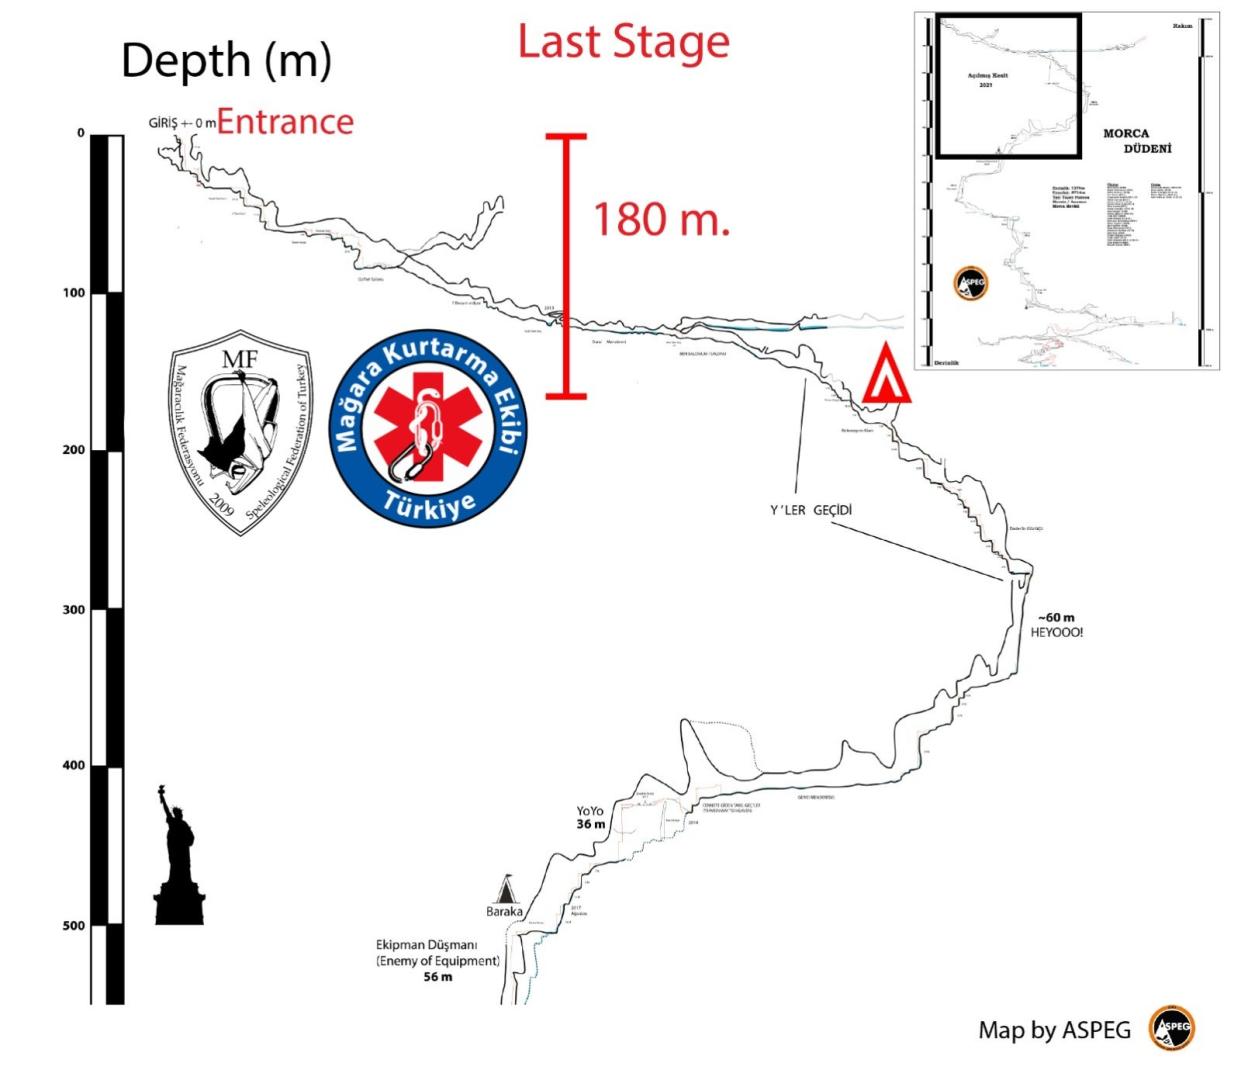 The final stage of Mark Dickey’s rescue evacuation from the Morca cave (European Cave Rescue Association (ECRA))